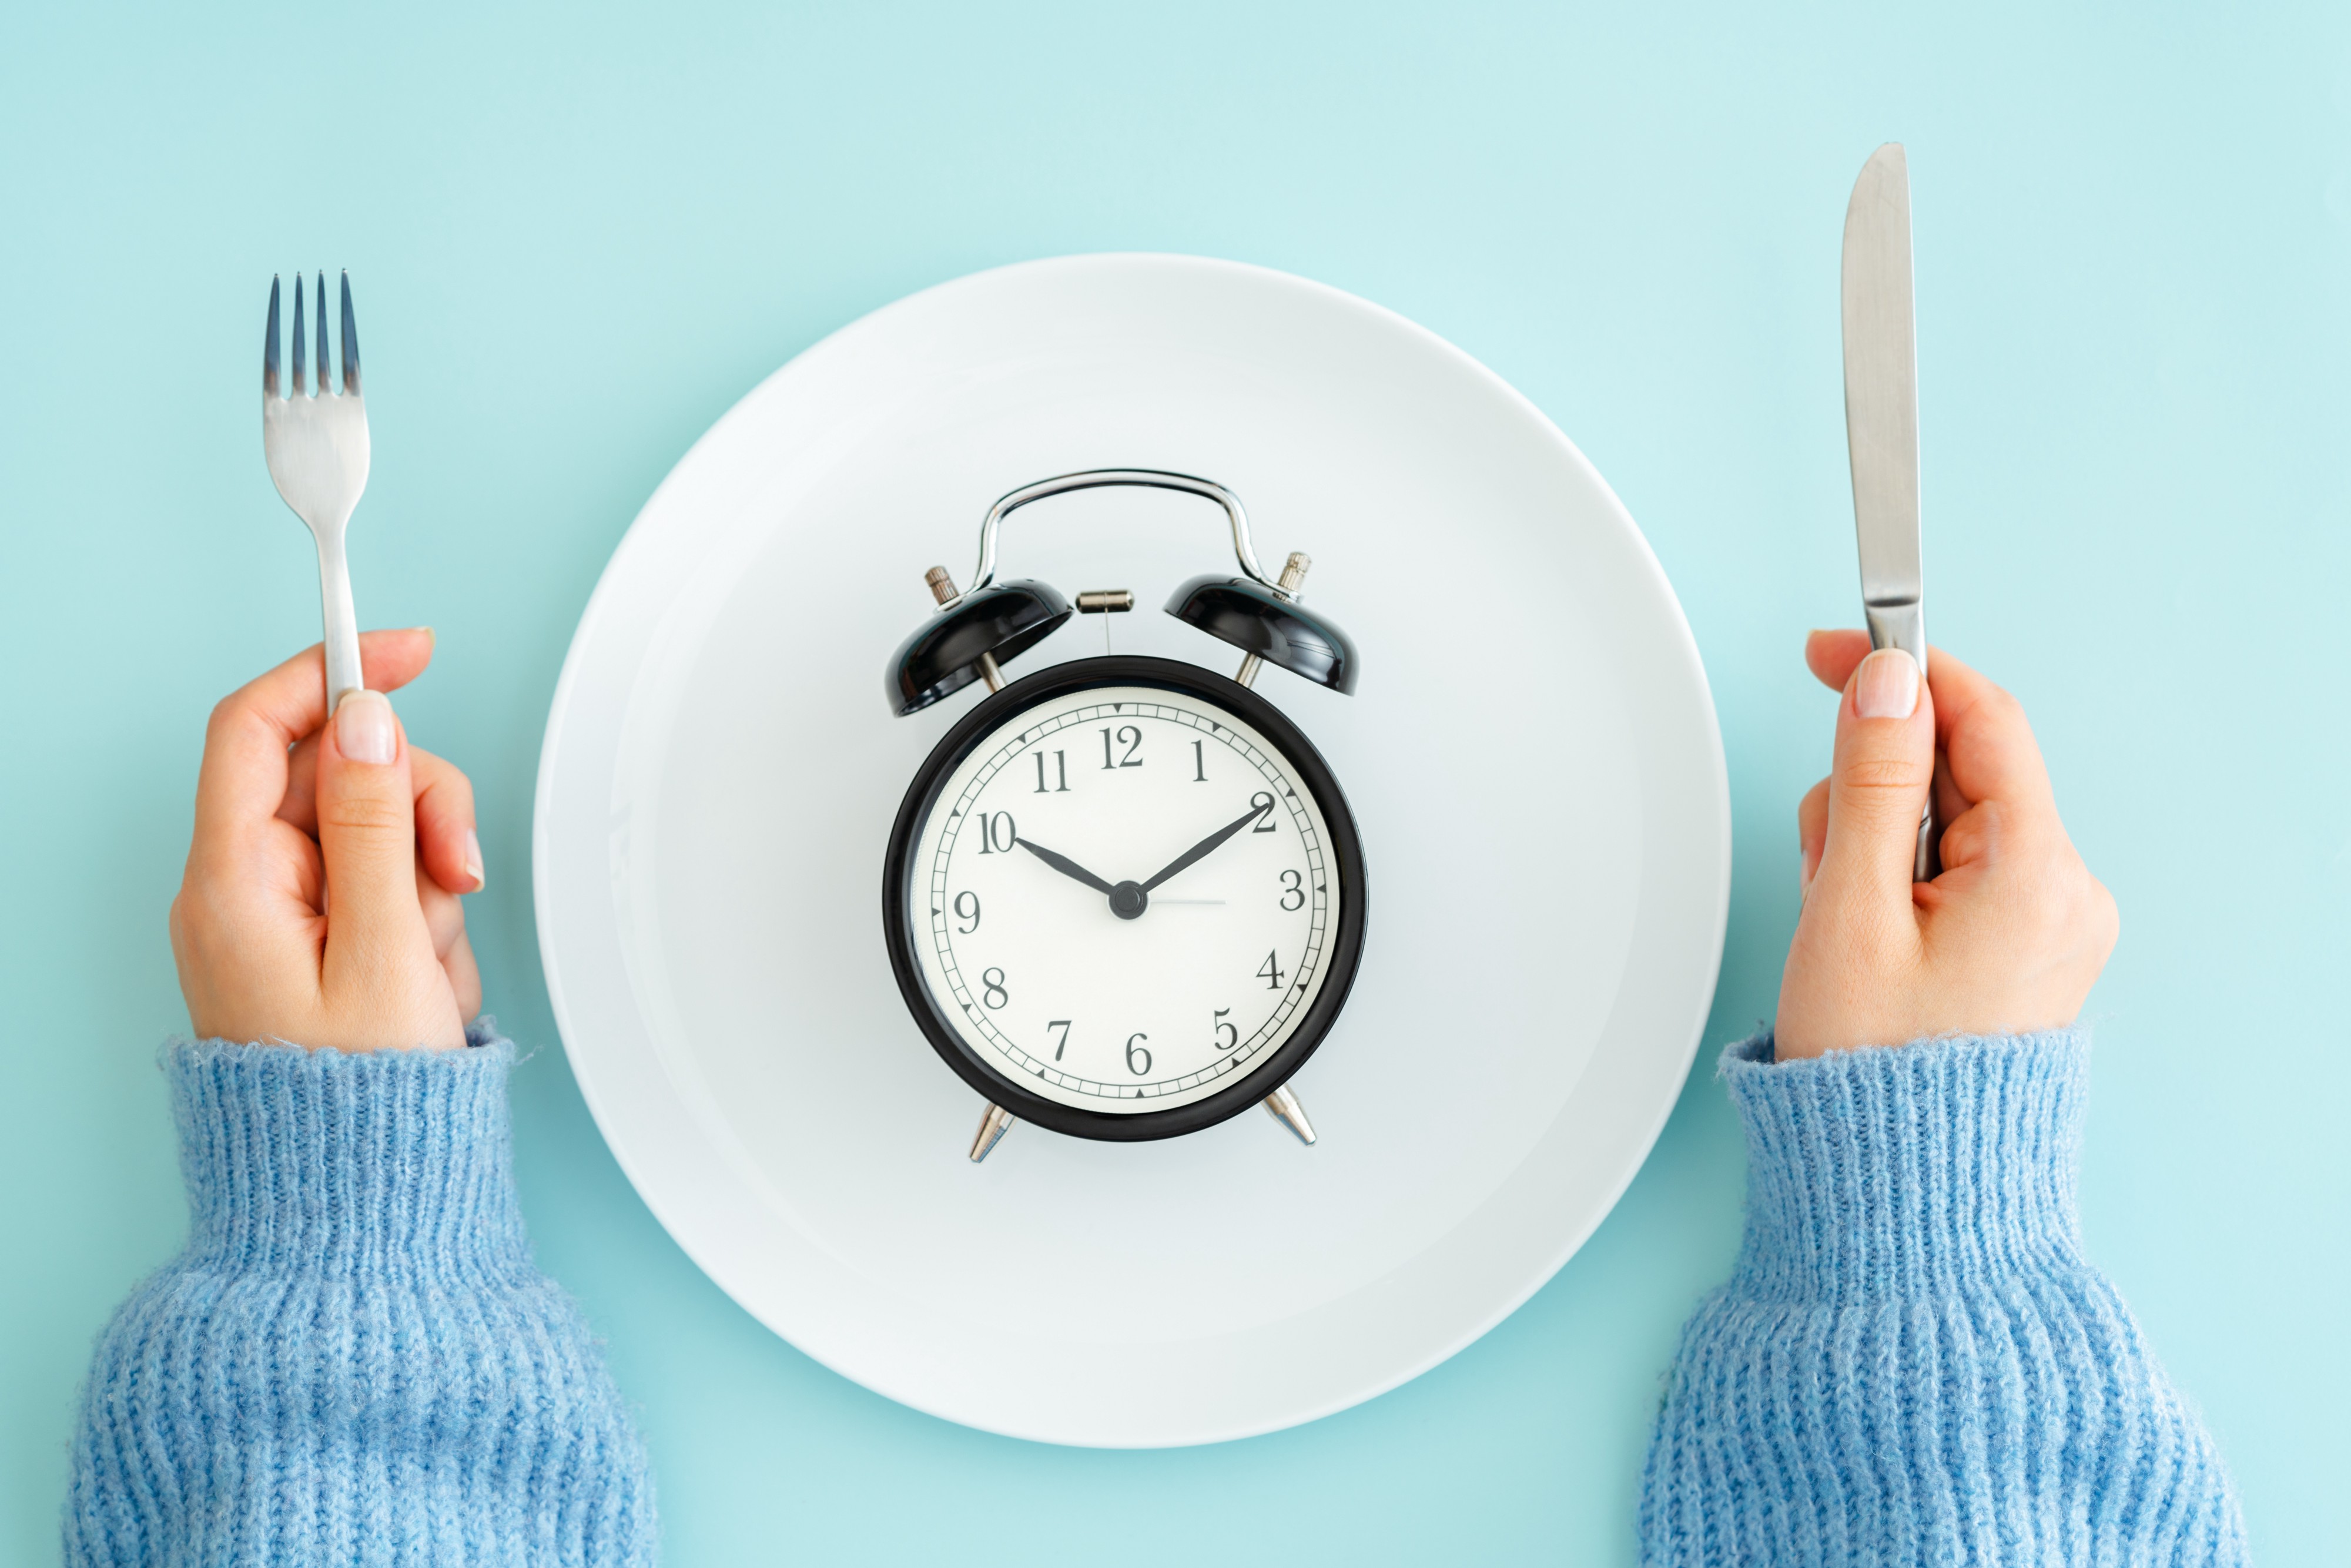 Reduce your appetite with a mealtime strategy